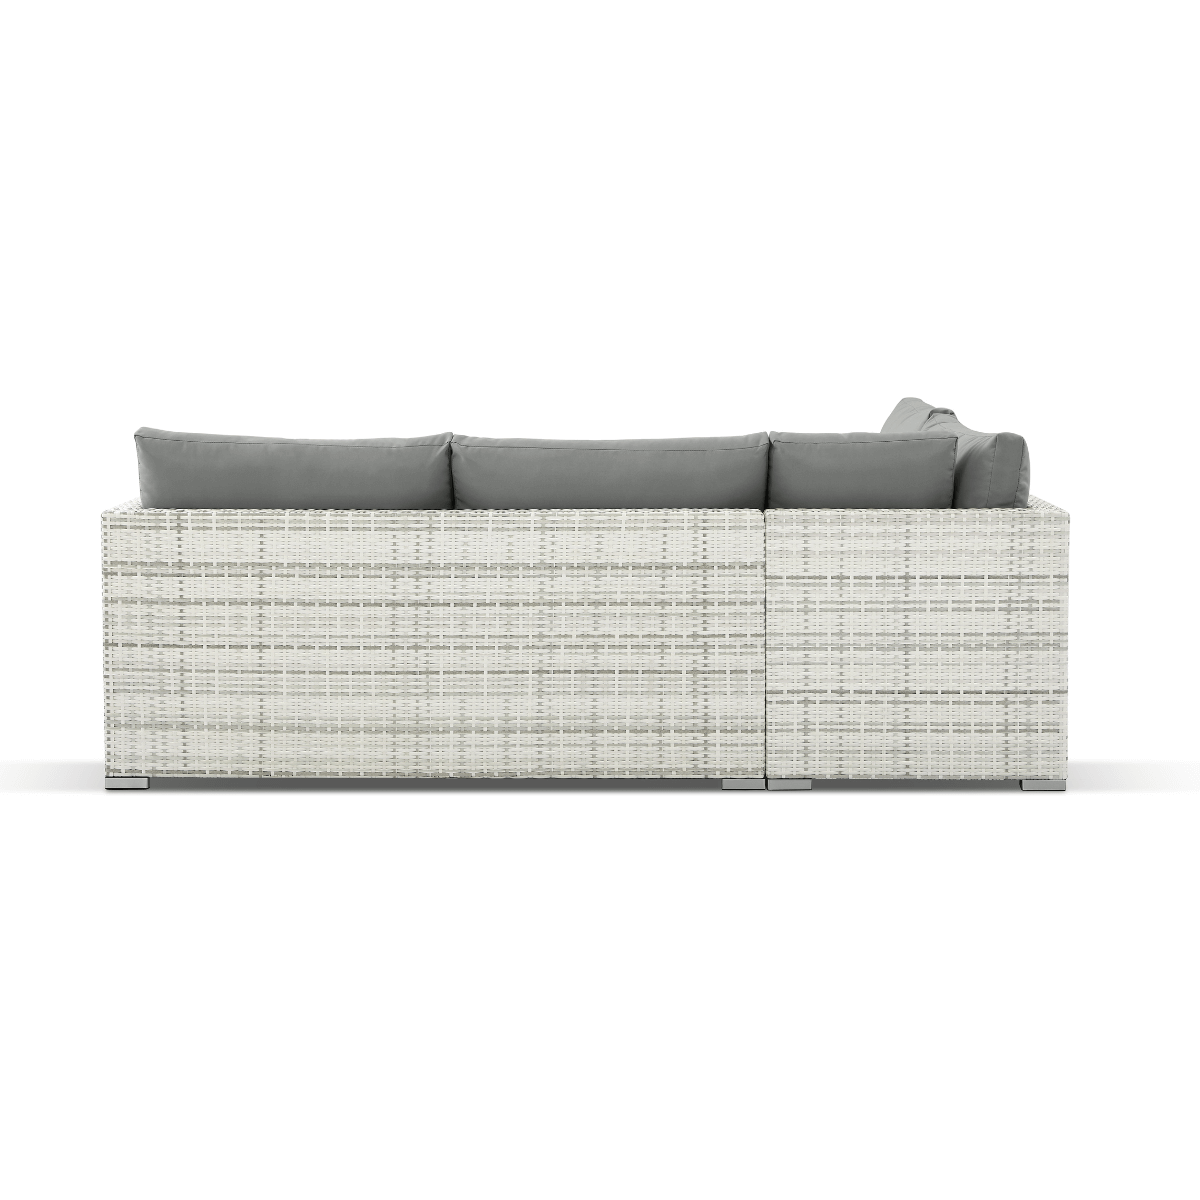 Archie 4 Seater Outdoor Lounge set-Upinteriors